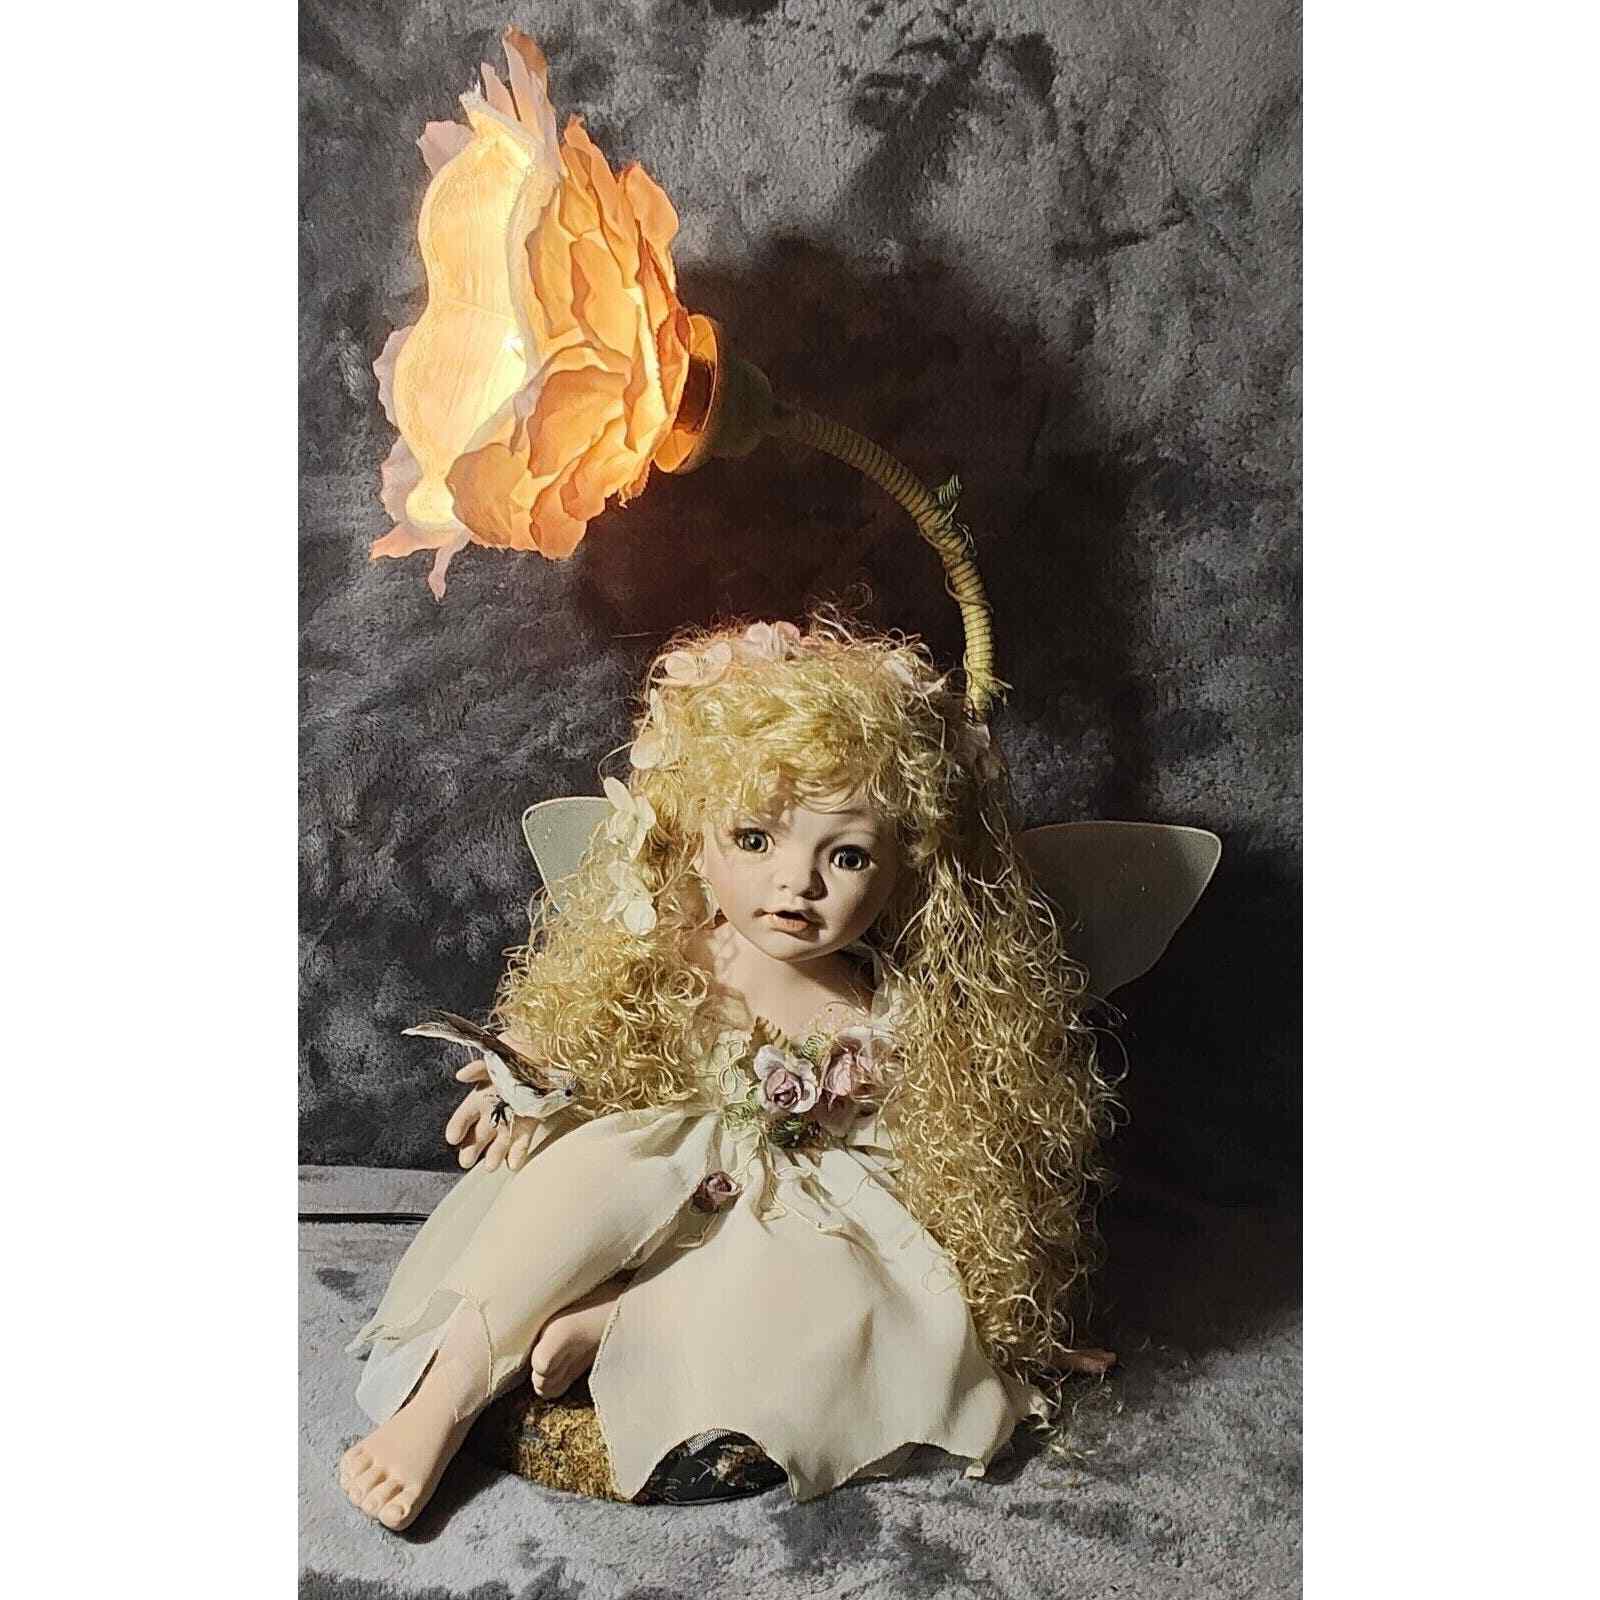 STUNNING FAIRY LAMP FROM DUCK HOUSE HEIRLOOM DOLLS LIMITED EDITION 1038/5000